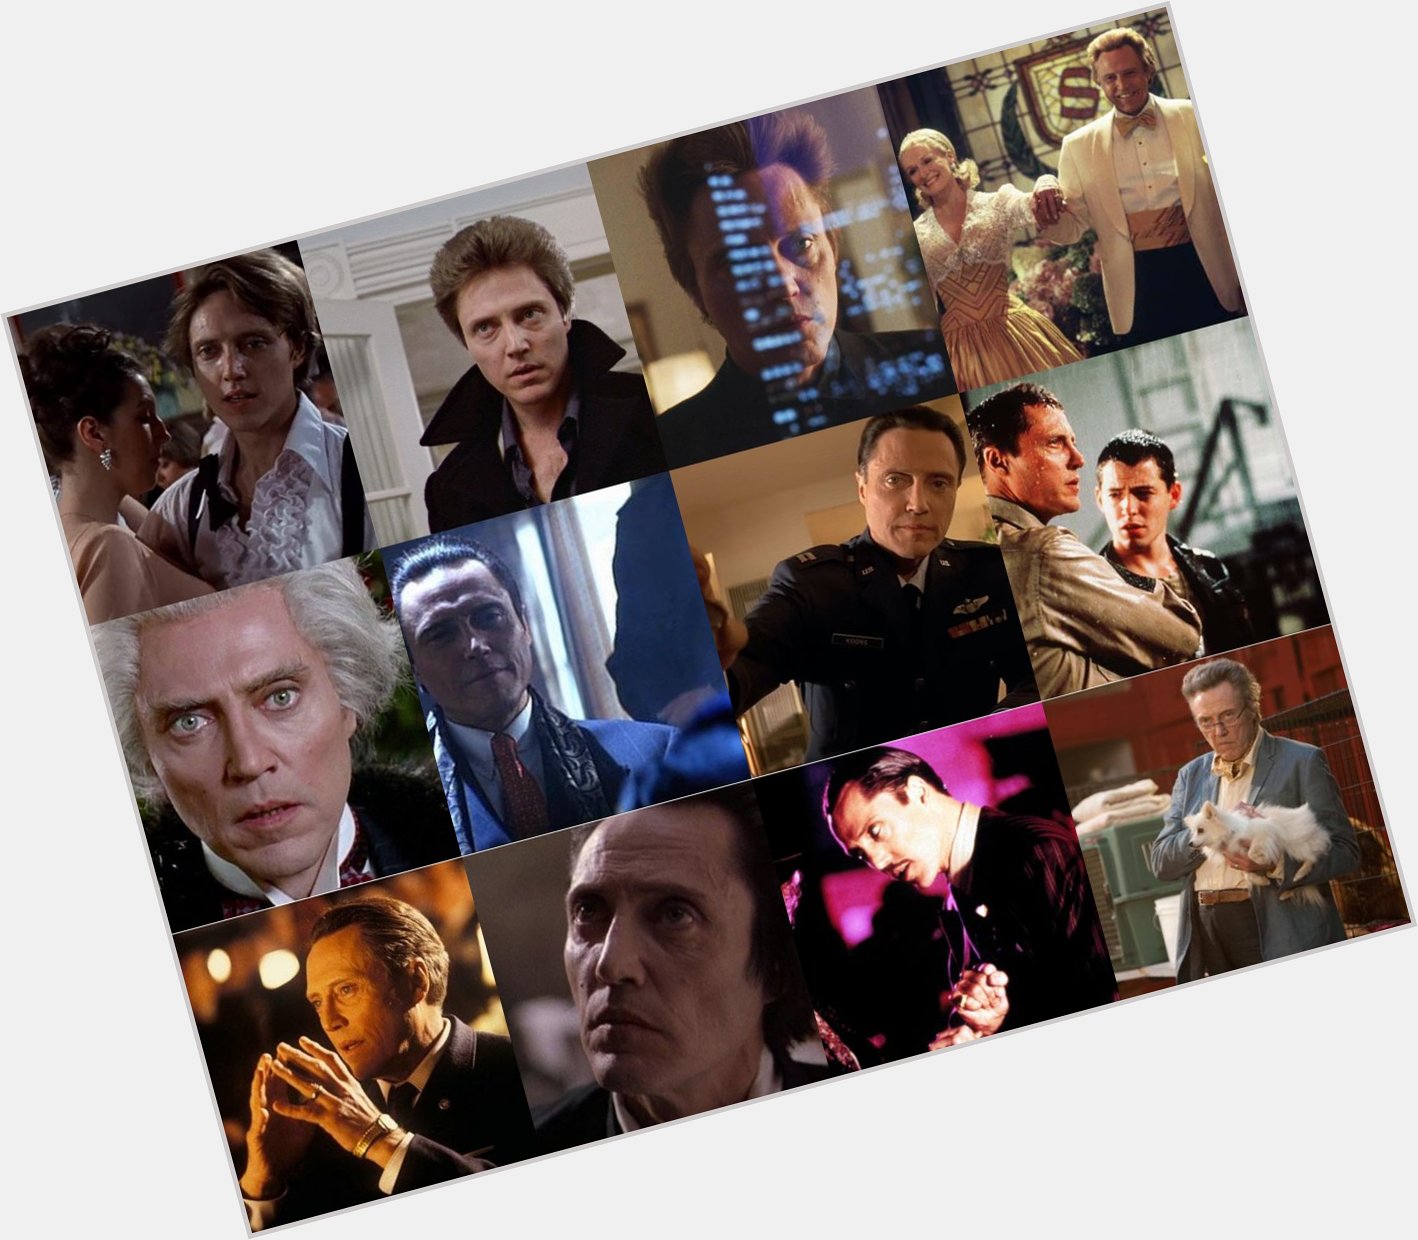 Happy 79th birthday to the great Christopher Walken! 